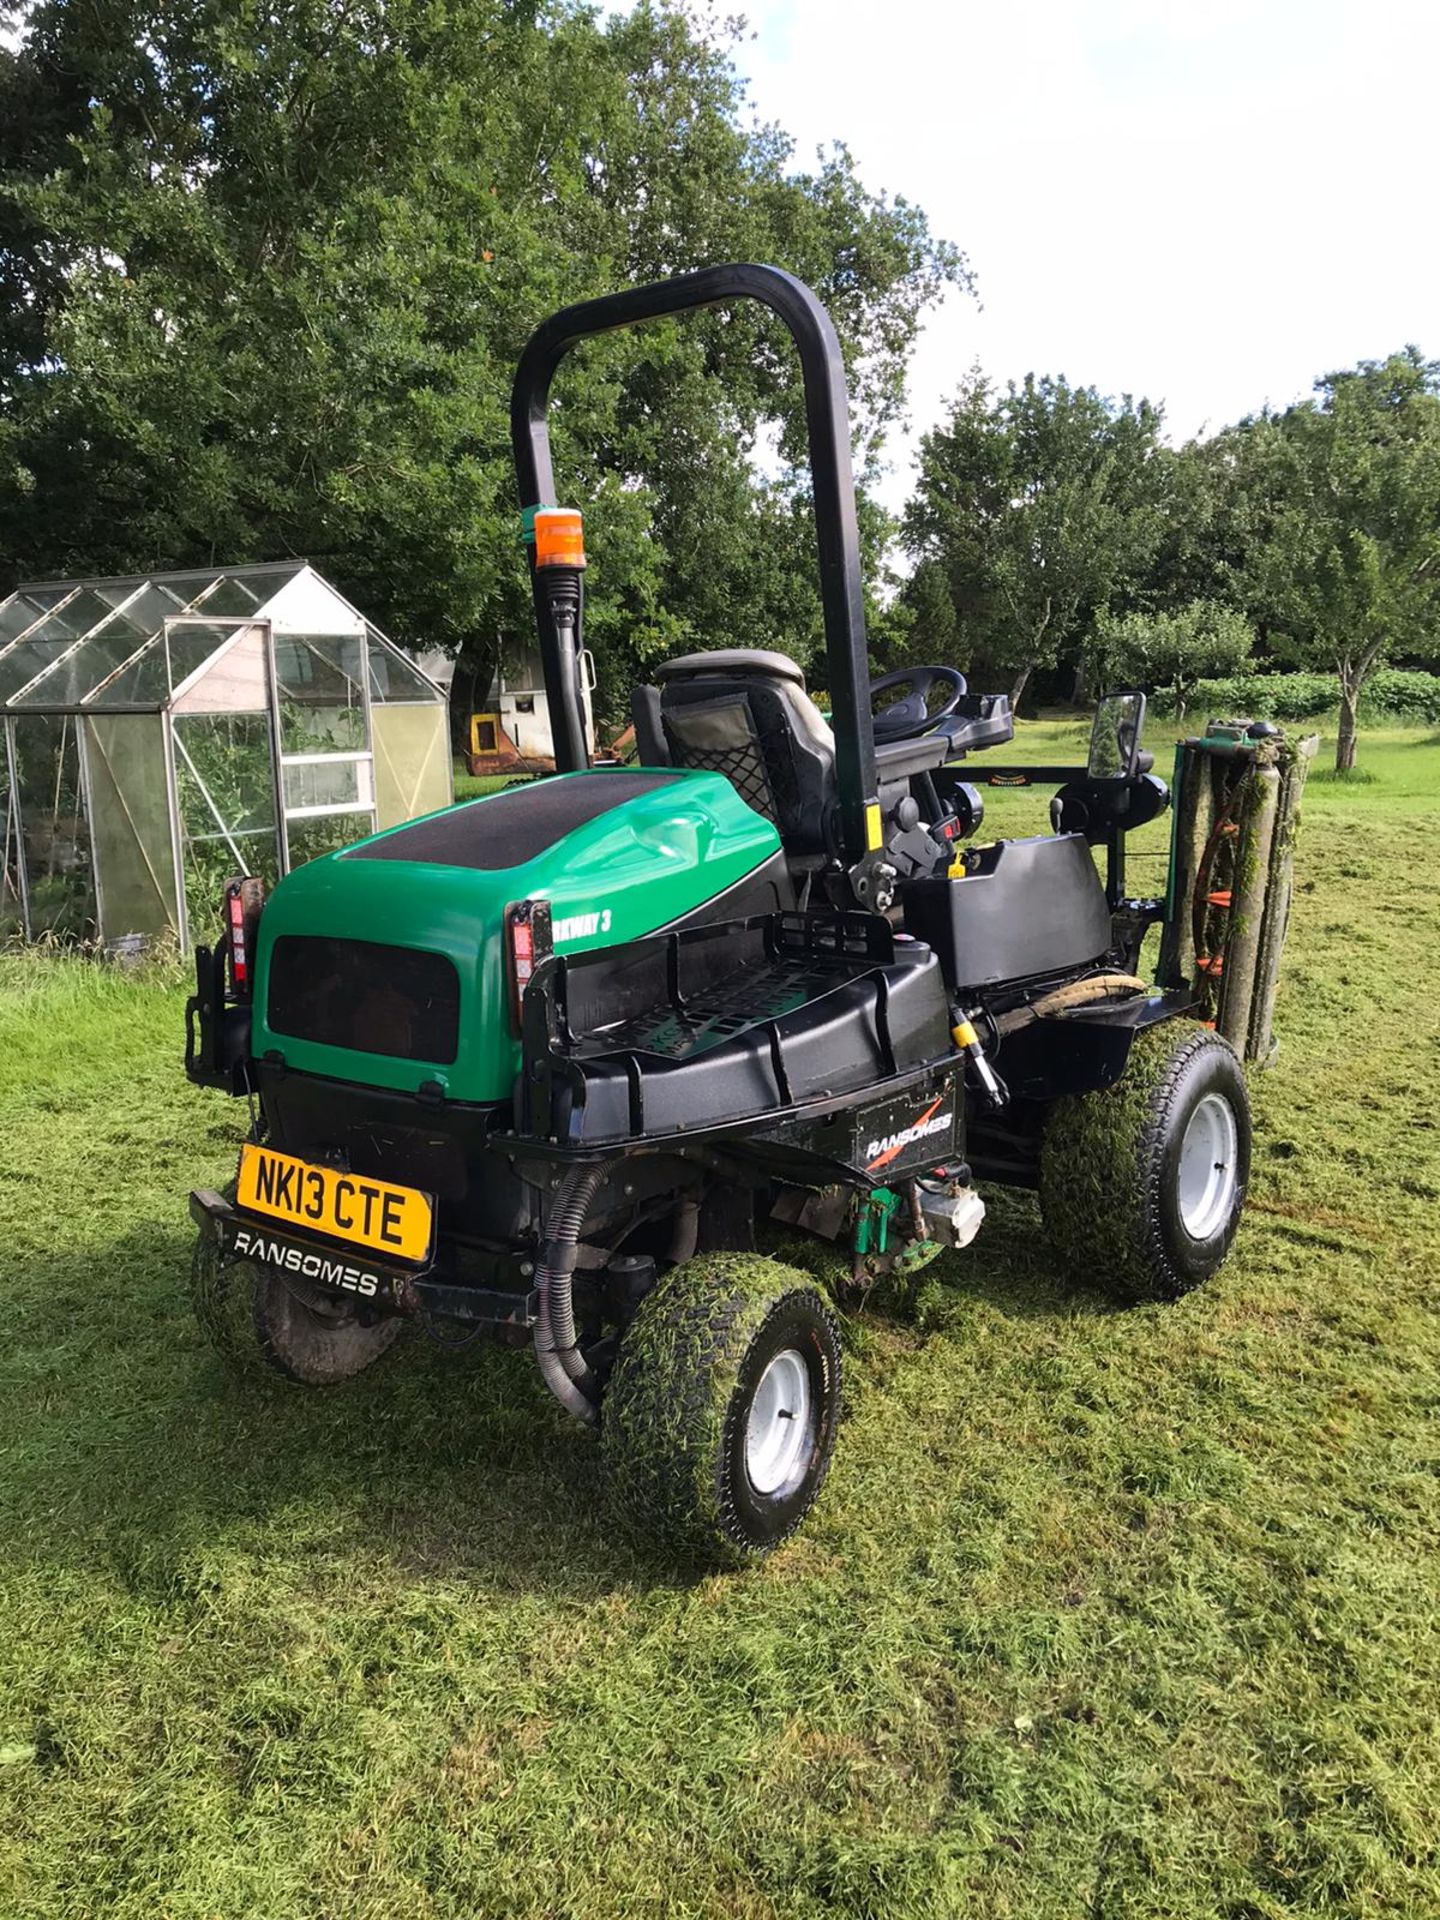 2013 RANSOMES PARKWAY 3 GANG RIDE ON LAWN MOWER WITH ROLL BAR, RUNS, DRIVES AND CUTS *PLUS VAT* - Image 3 of 5